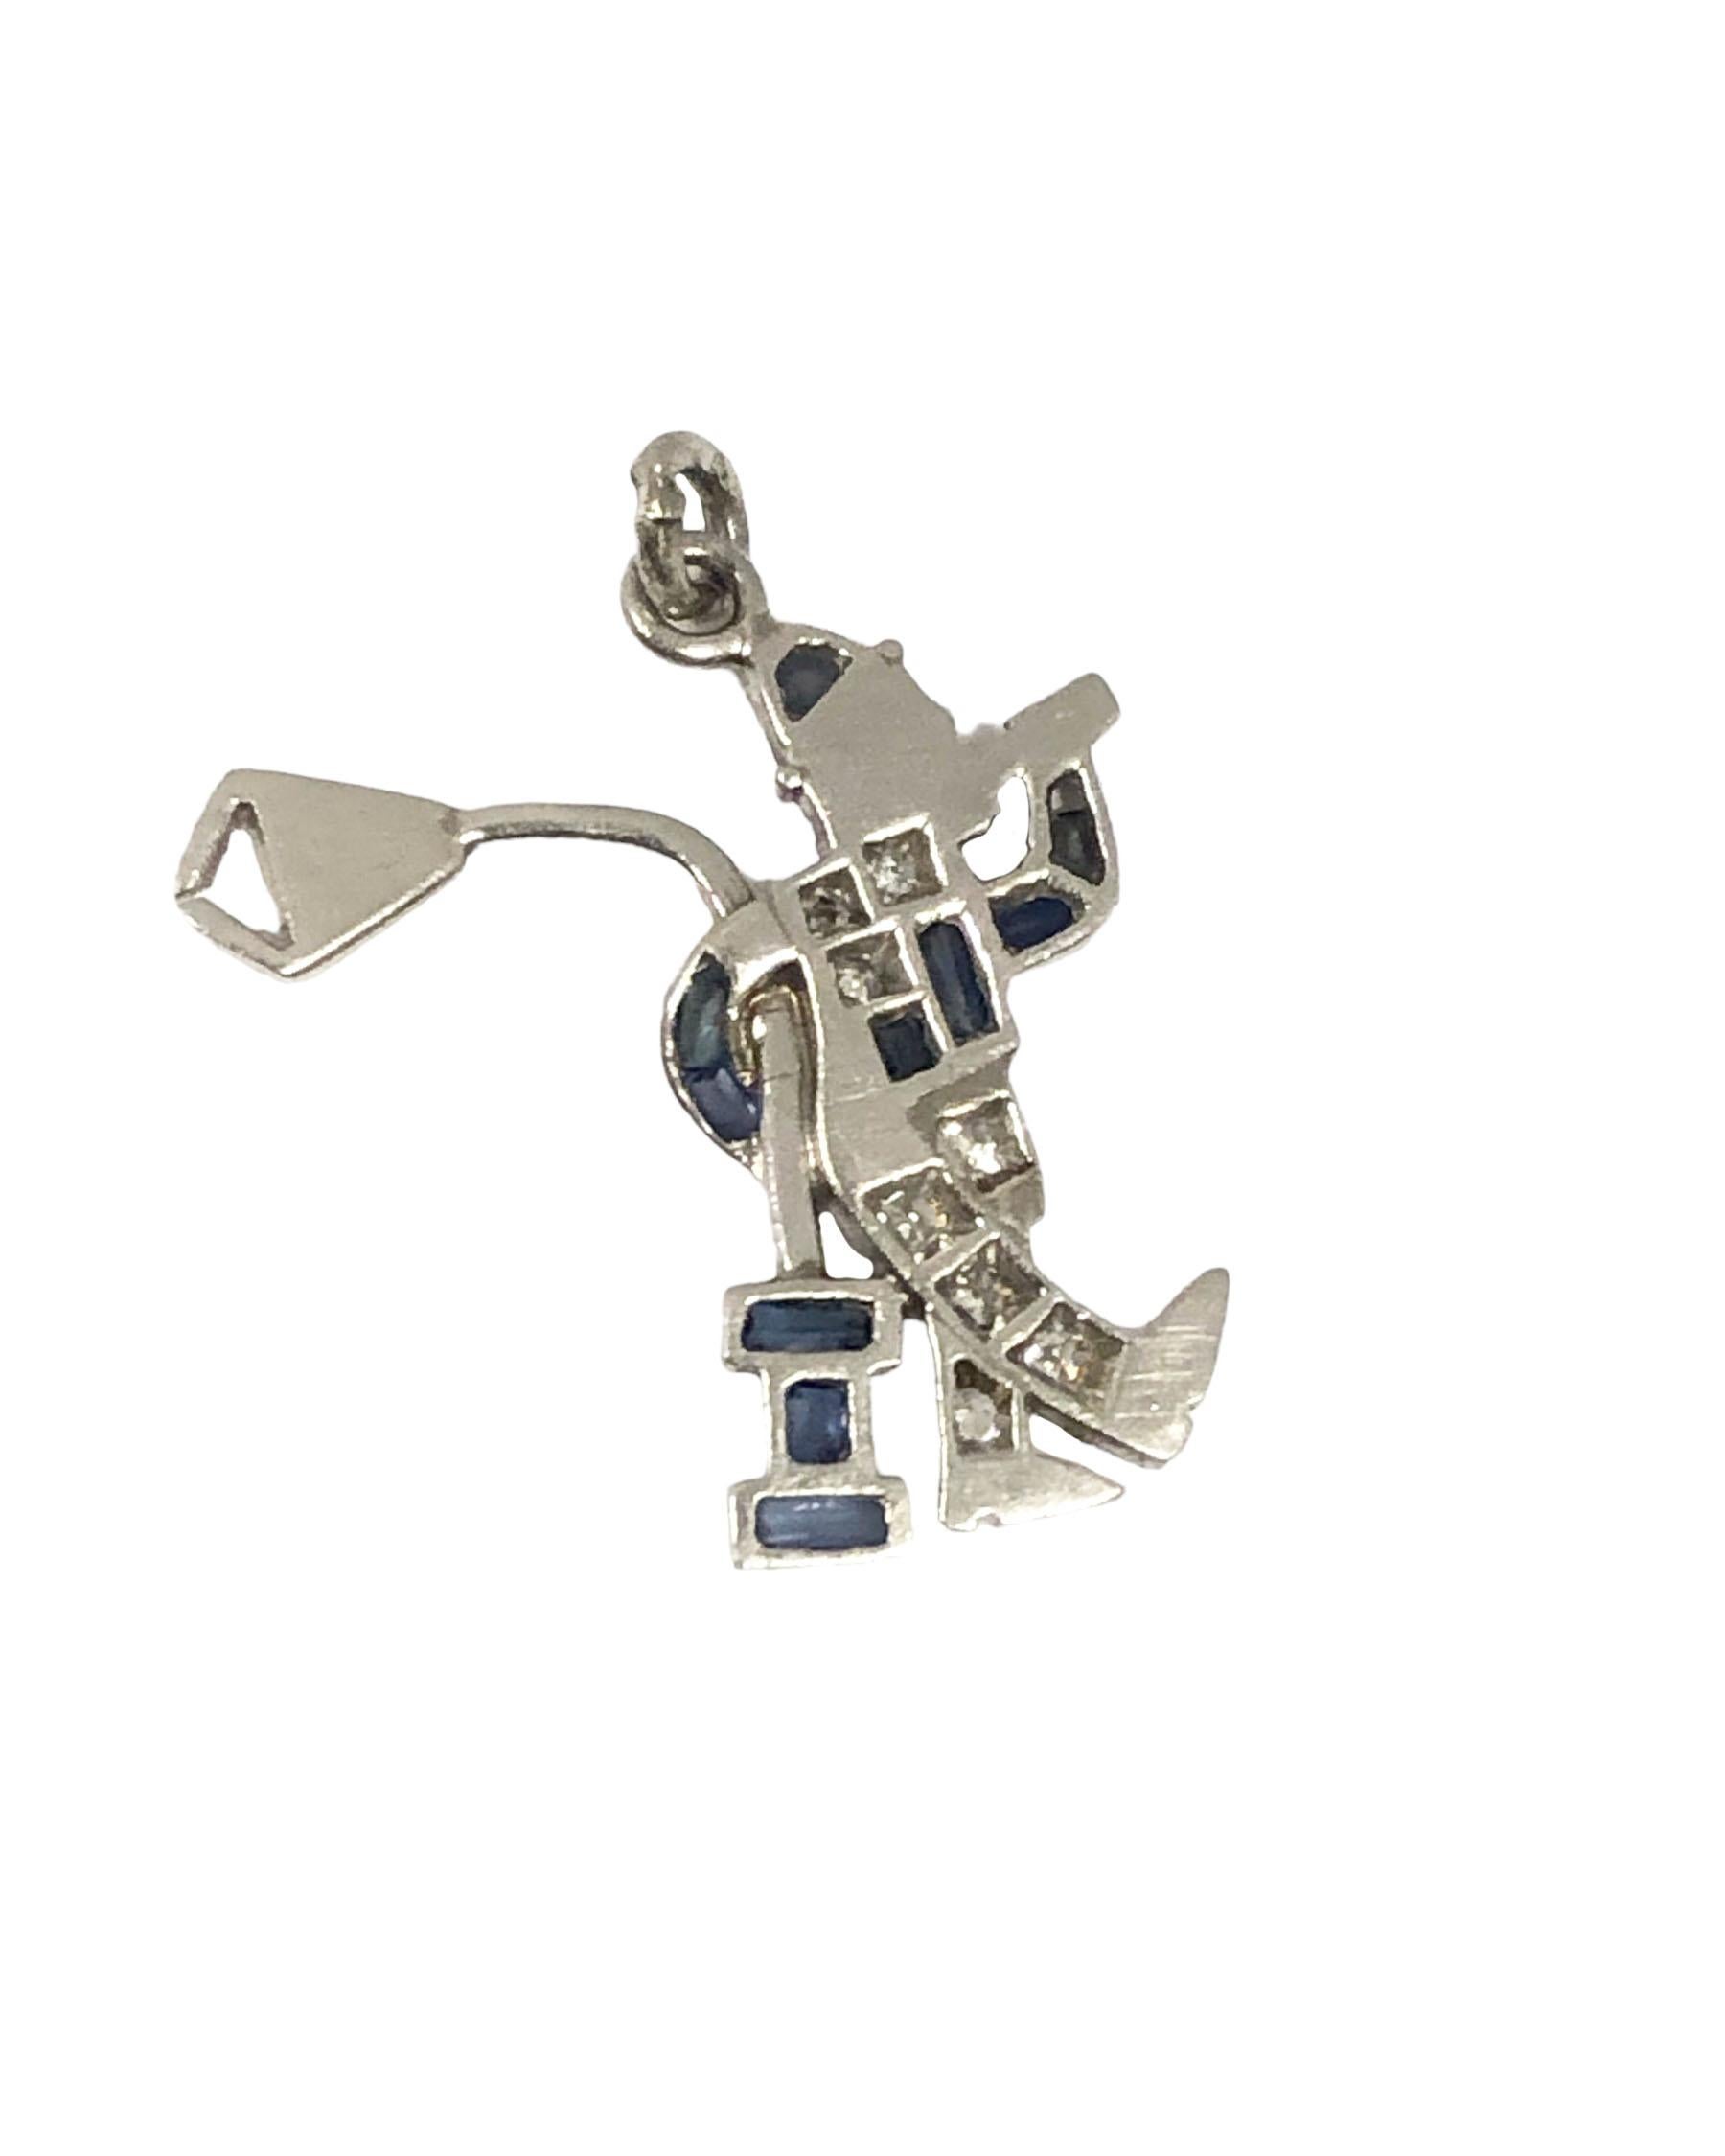 Circa 1930s Art Deco Platinum, Diamond and Sapphire set Guy Drinking at a Lamp Post Charm, measuring 3/4 X 5/8 inch, set with Diamonds and Sapphires. 